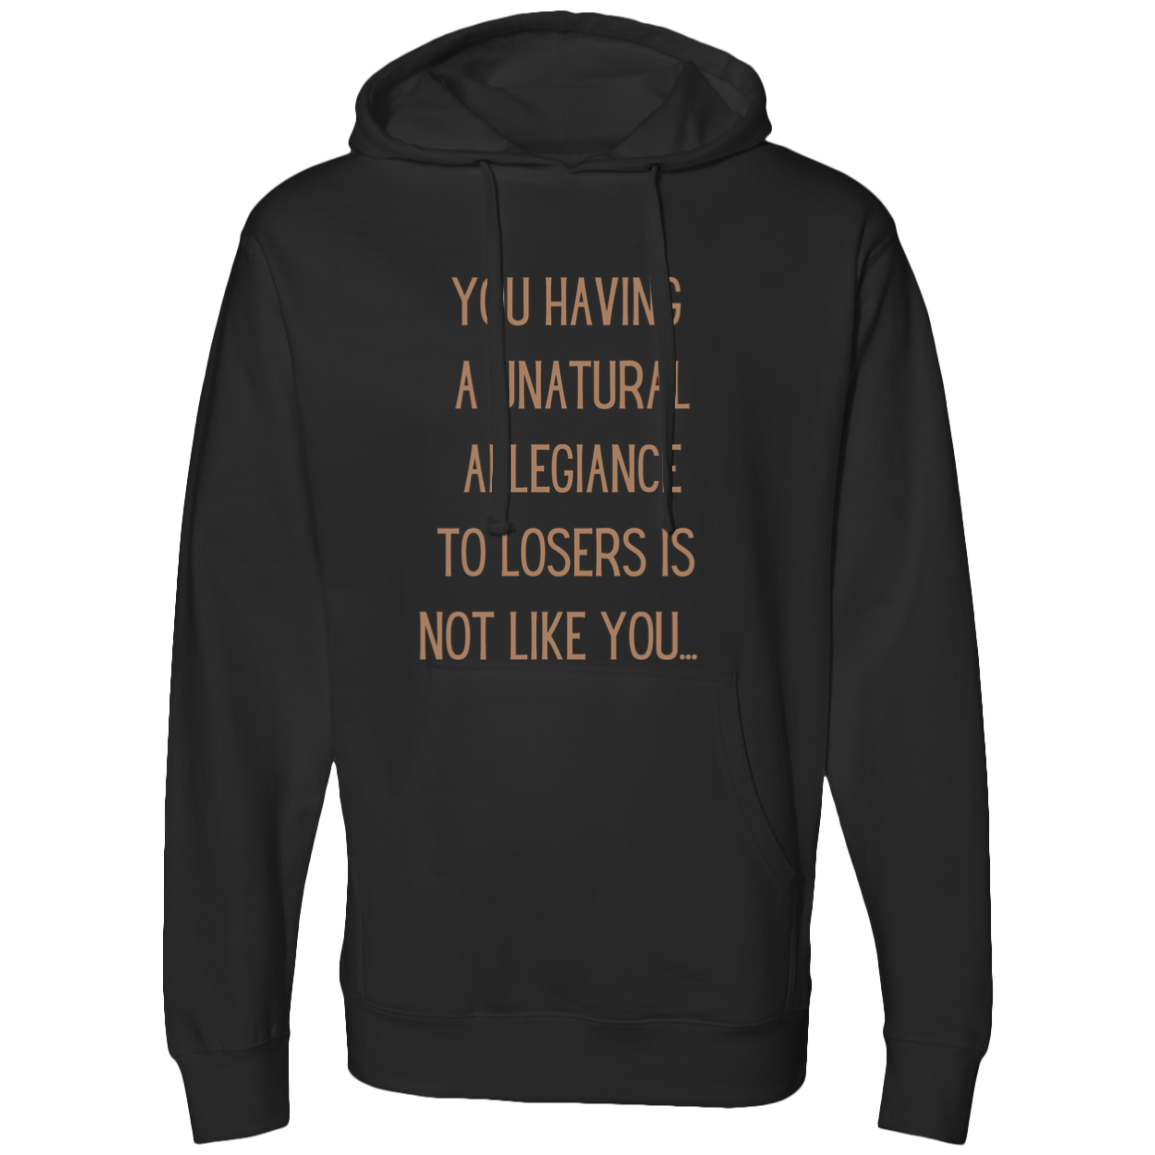 Katt Williams said it best: You having a unatural allegiance to losers is not like you… Hooded Sweatshirt